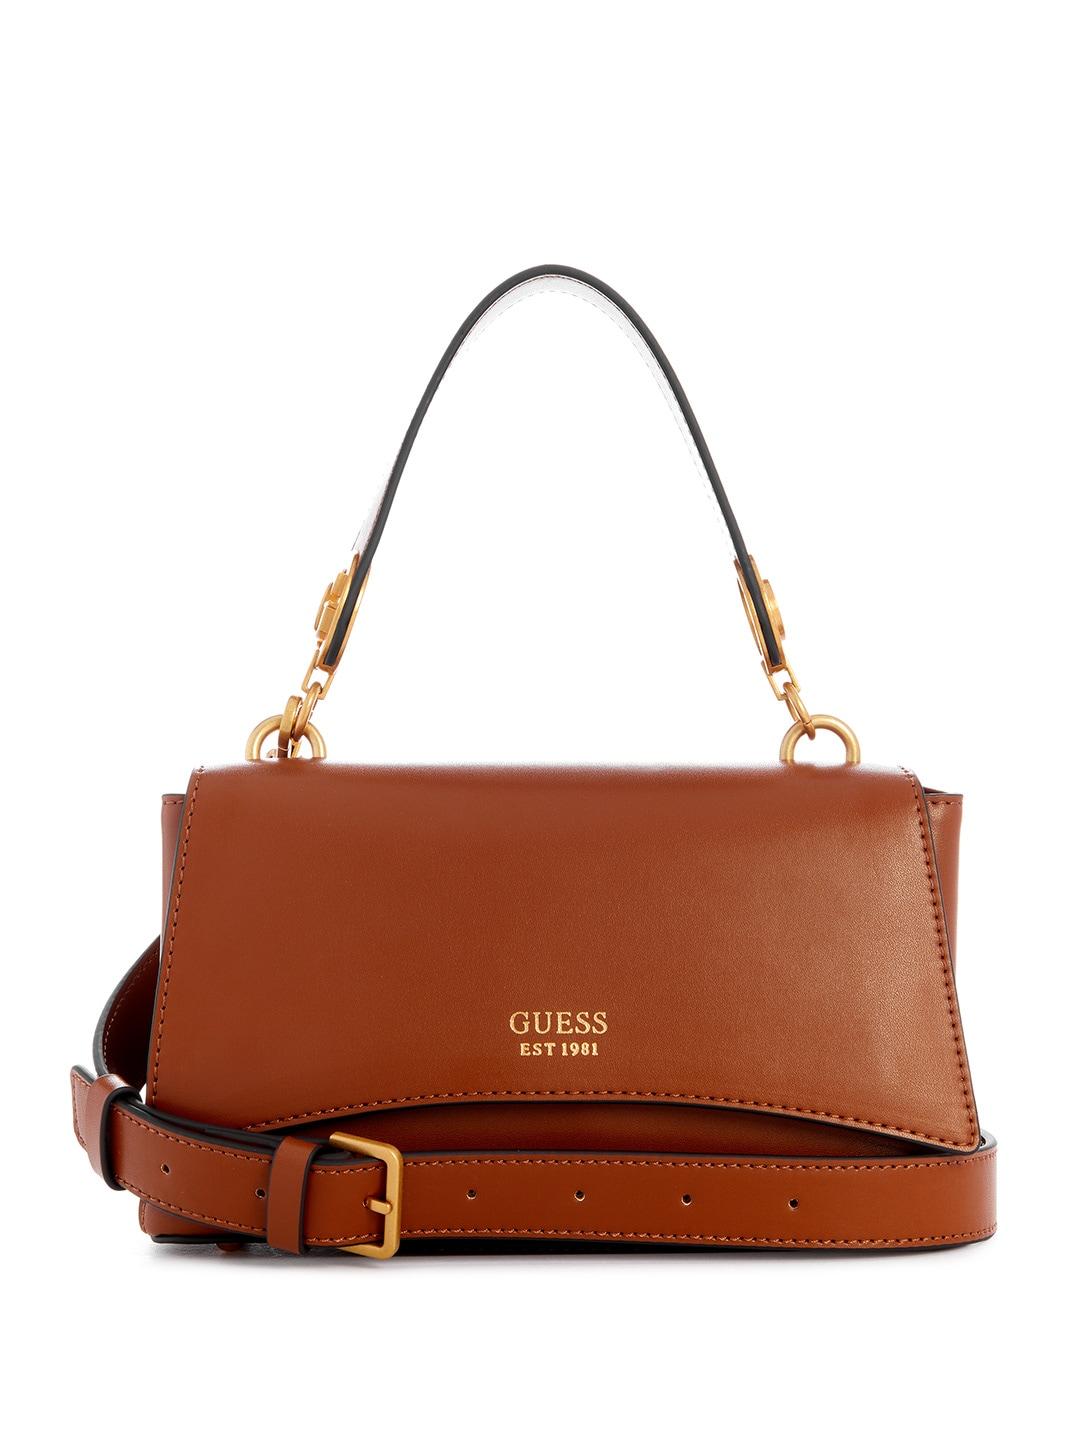 guess structured satchel bag